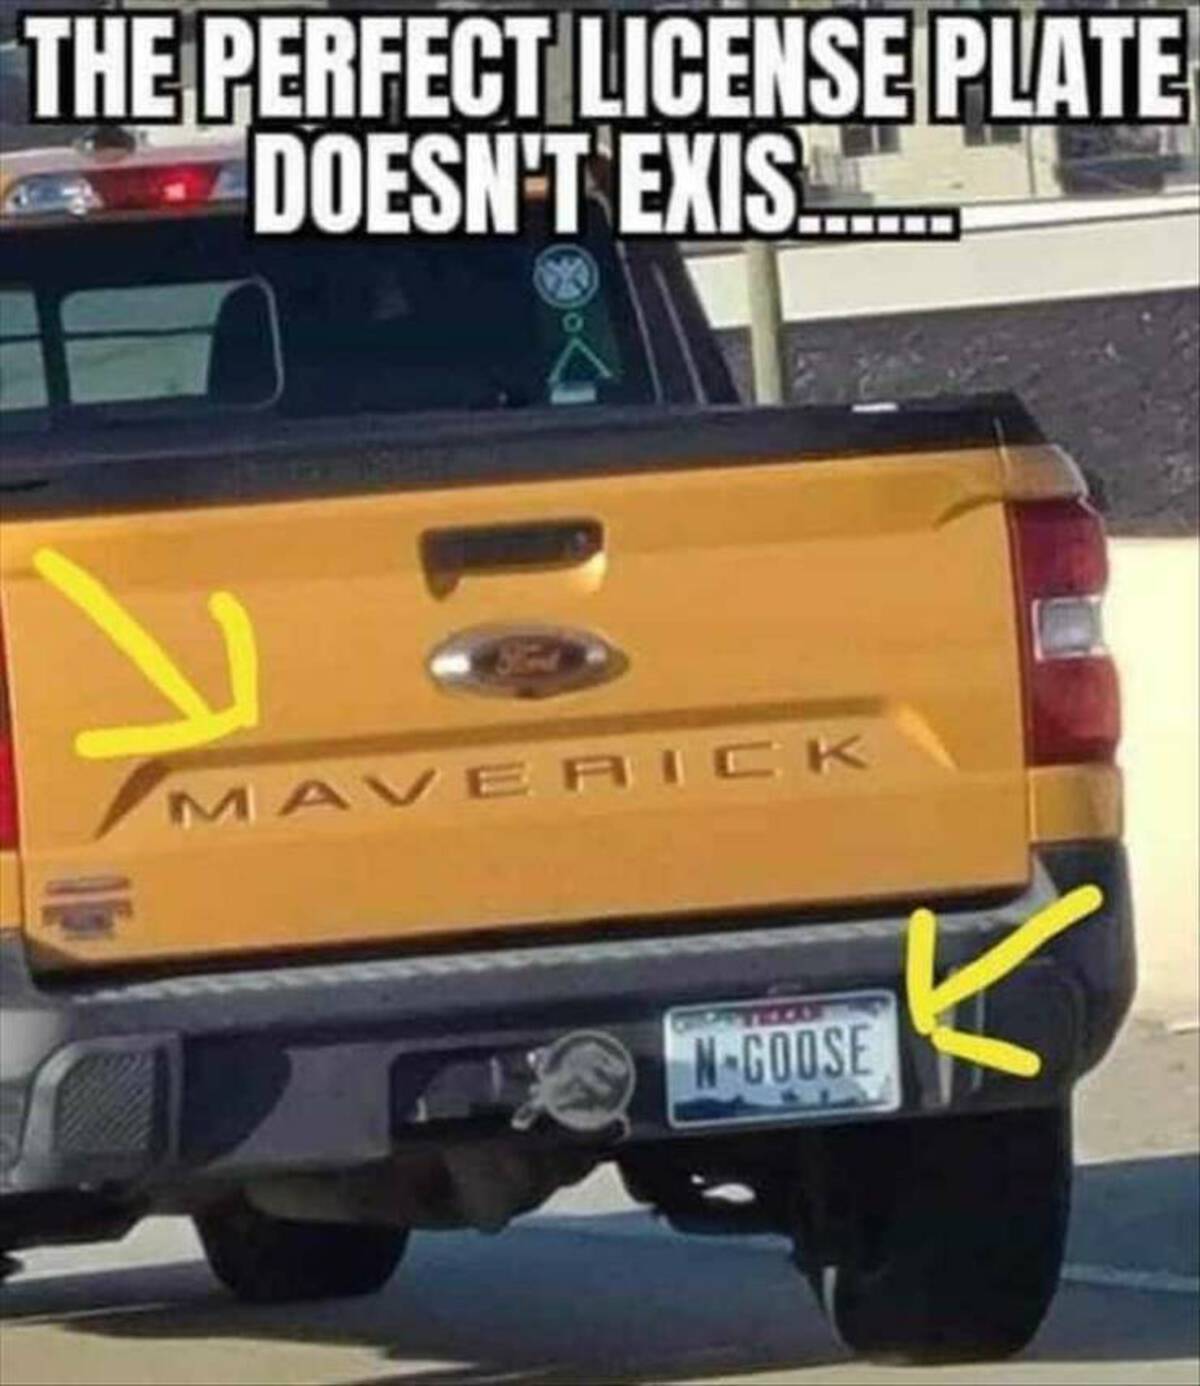 maverick and goose license plate - The Perfect License Plate Doesn'T Exis..... Maverick NGoose